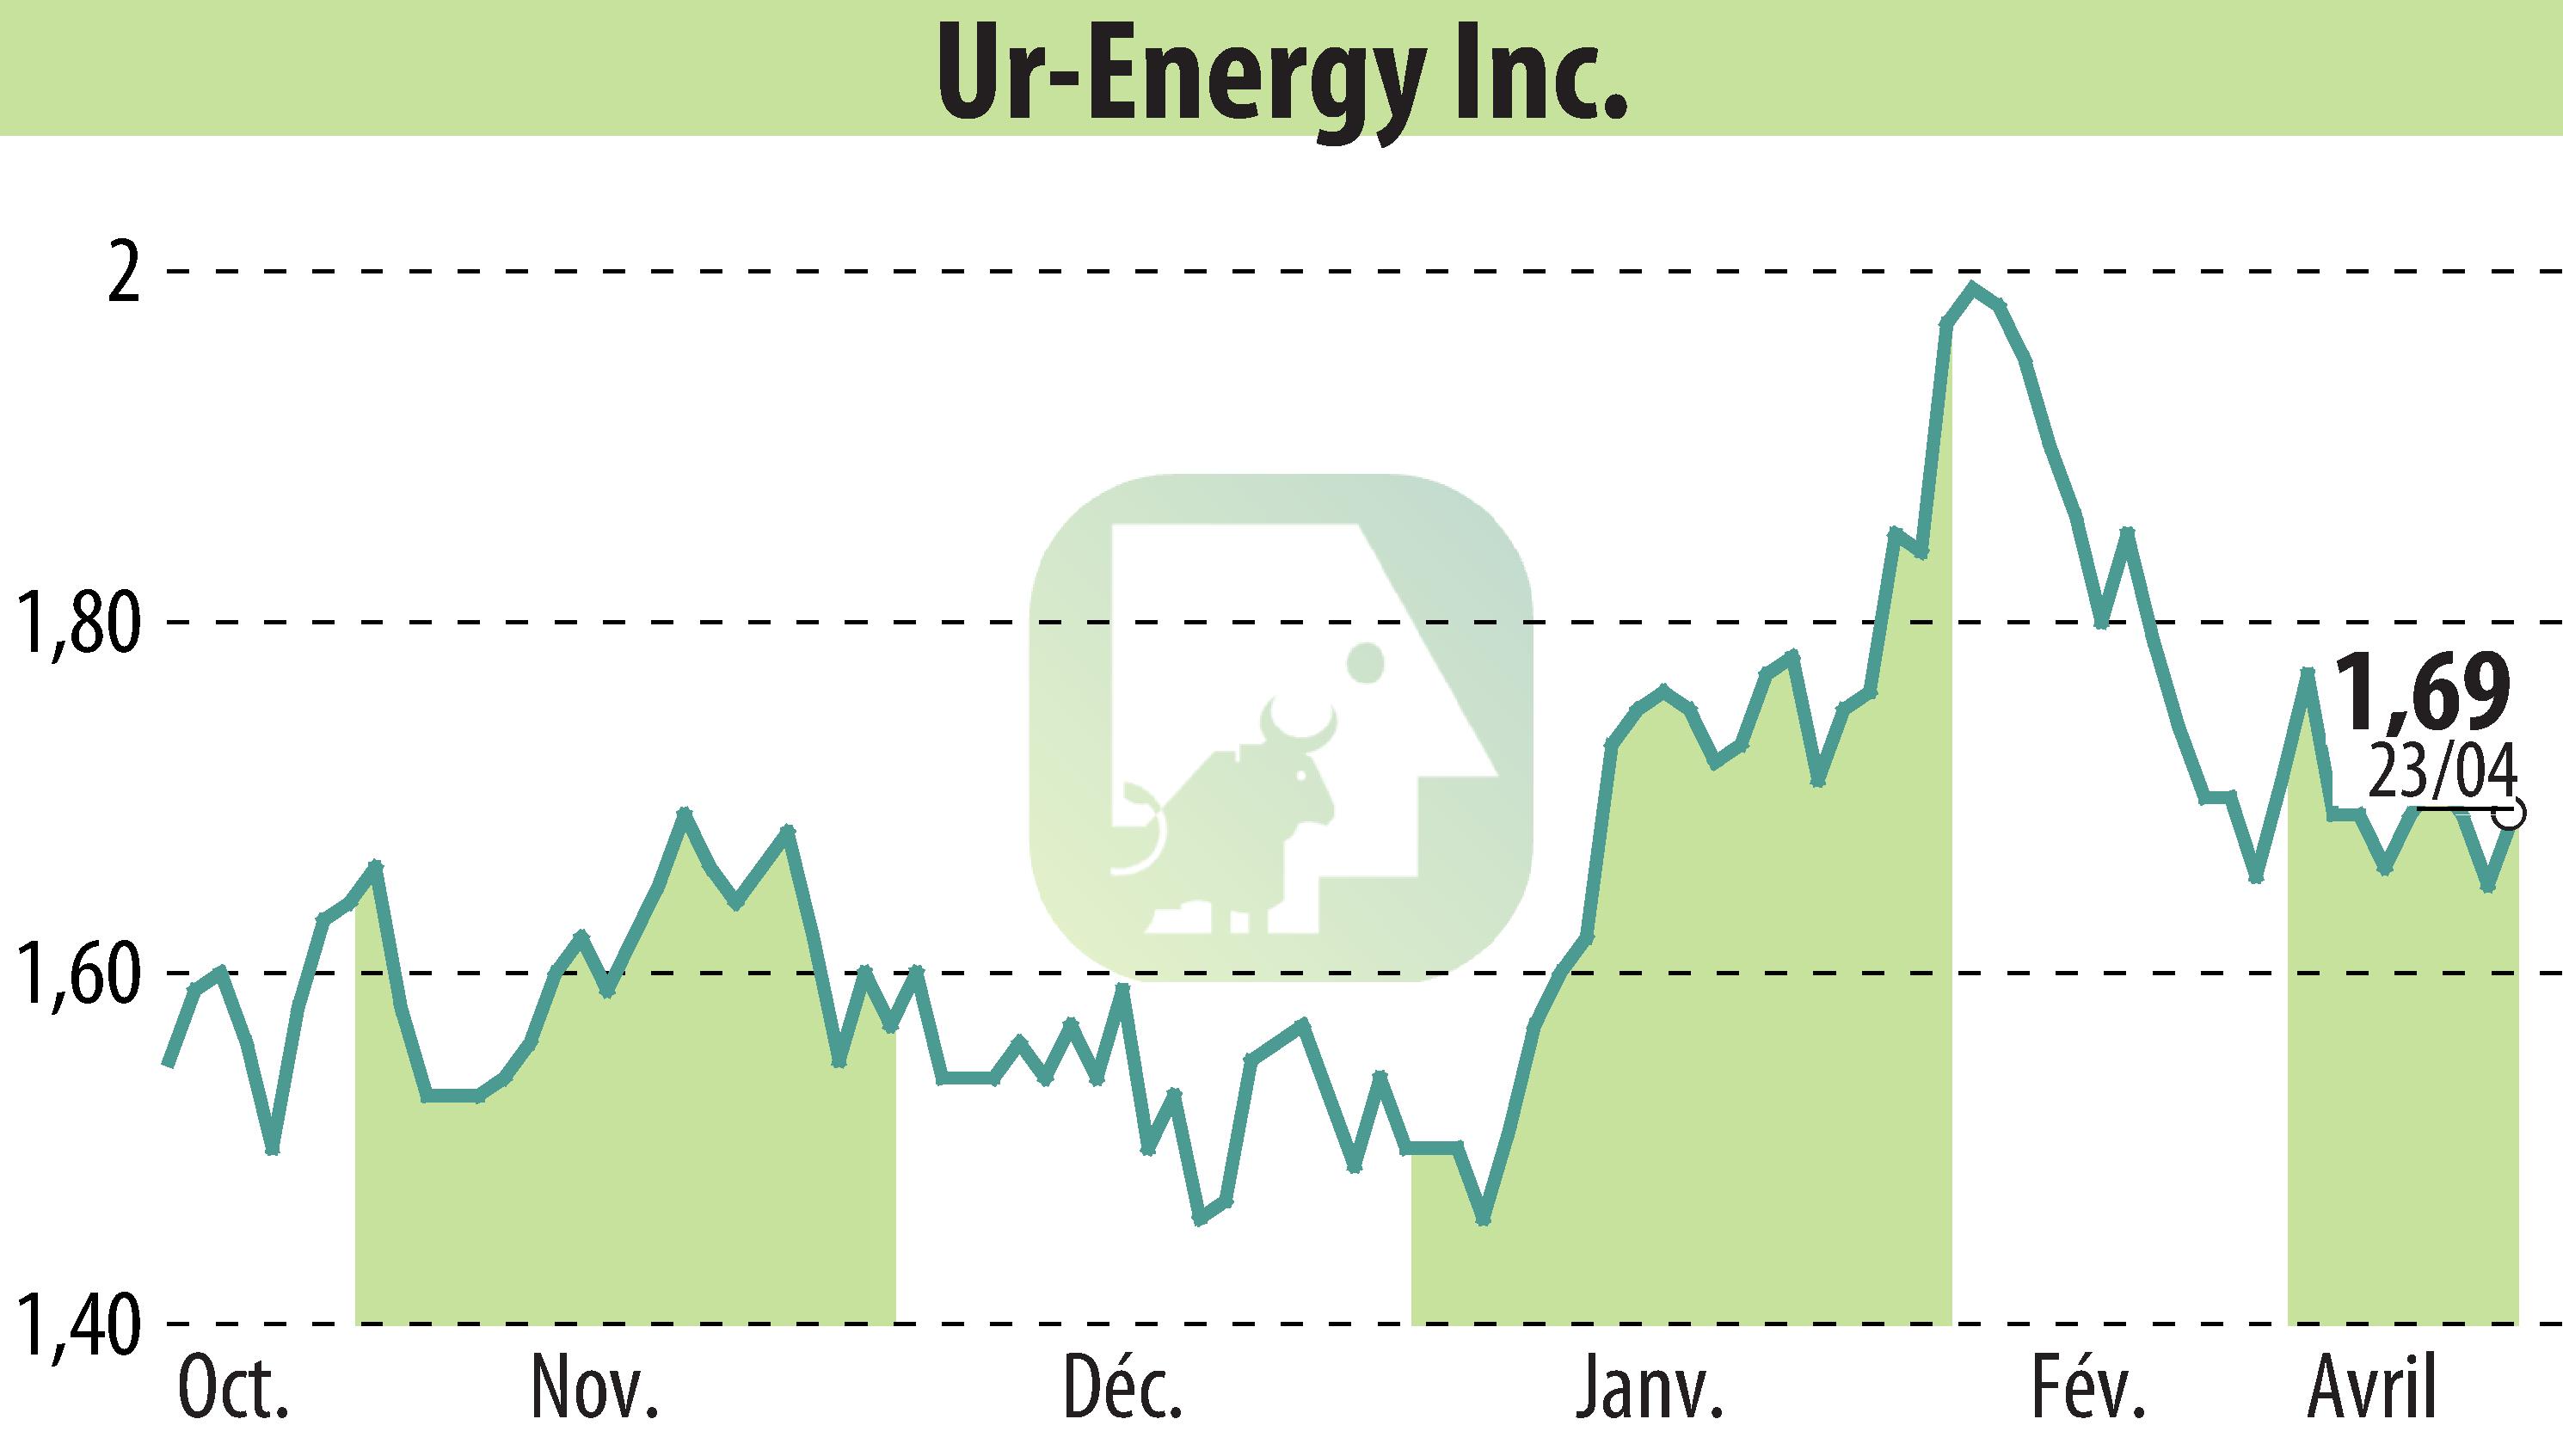 Stock price chart of Ur-Energy Inc. (EBR:URG) showing fluctuations.